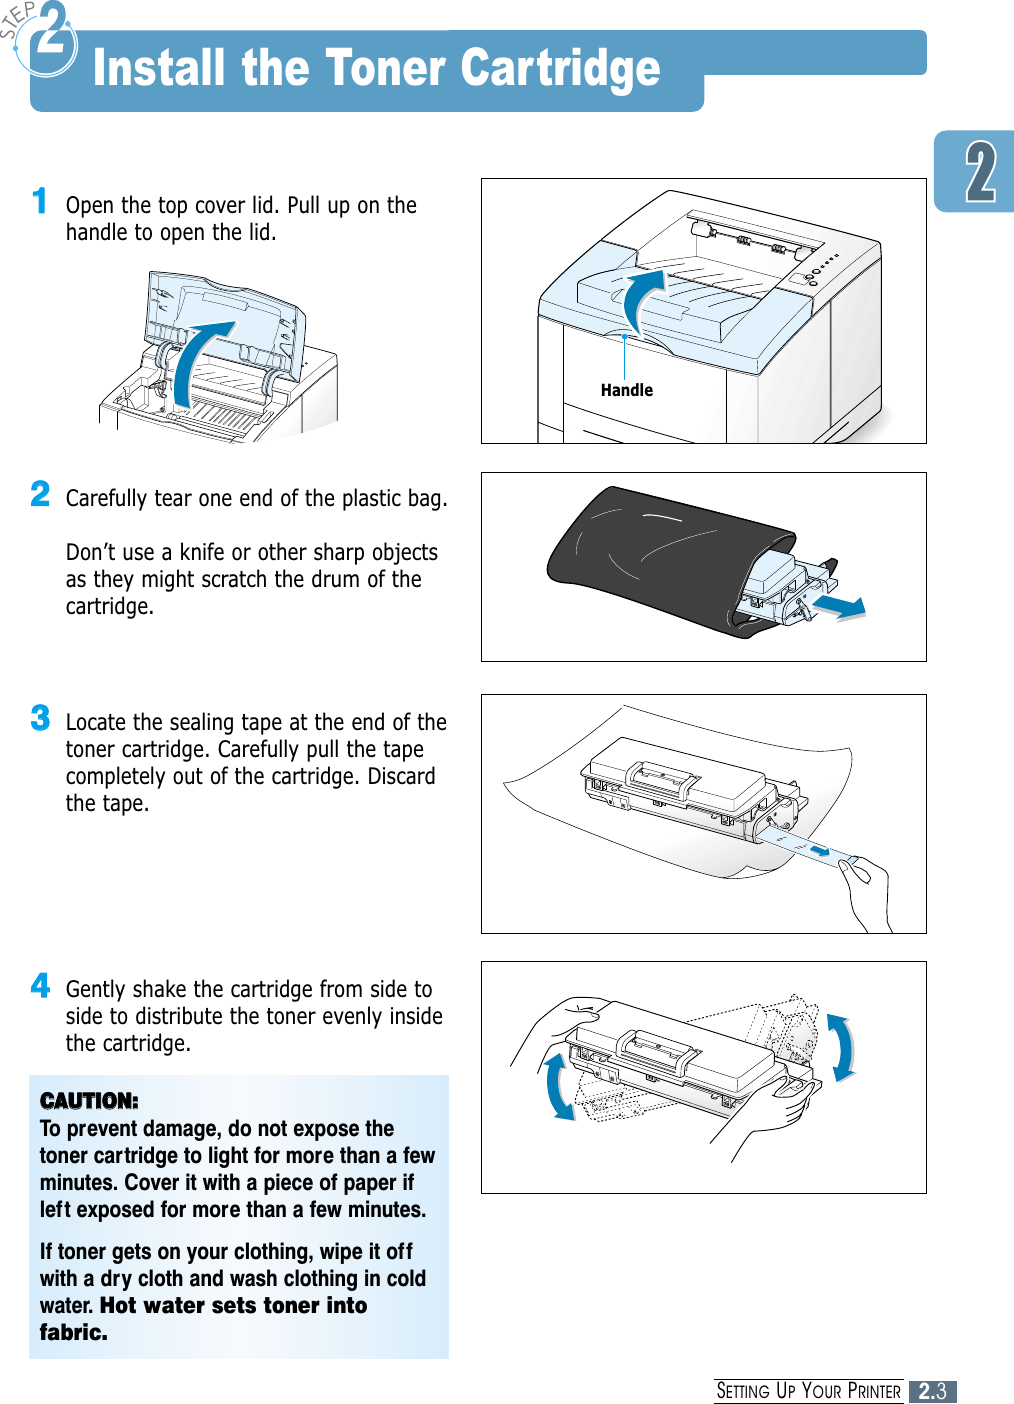 2.3SETTING UPYOUR PRINTER11Open the top cover lid. Pull up on thehandle to open the lid.22Carefully tear one end of the plastic bag. Don’t use a knife or other sharp objectsas they might scratch the drum of thecartridge.33Locate the sealing tape at the end of thetoner cartridge. Carefully pull the tapecompletely out of the cartridge. Discardthe tape.44Gently shake the cartridge from side toside to distribute the toner evenly insidethe cartridge.CCAAUUTTIIOONN::To prevent damage, do not expose thetoner cartridge to light for more than a fewminutes. Cover it with a piece of paper ifleft exposed for more than a few minutes.If toner gets on your clothing, wipe it offwith a dry cloth and wash clothing in coldwater. Hot water sets toner intofabric.Install the Toner CartridgeHandle